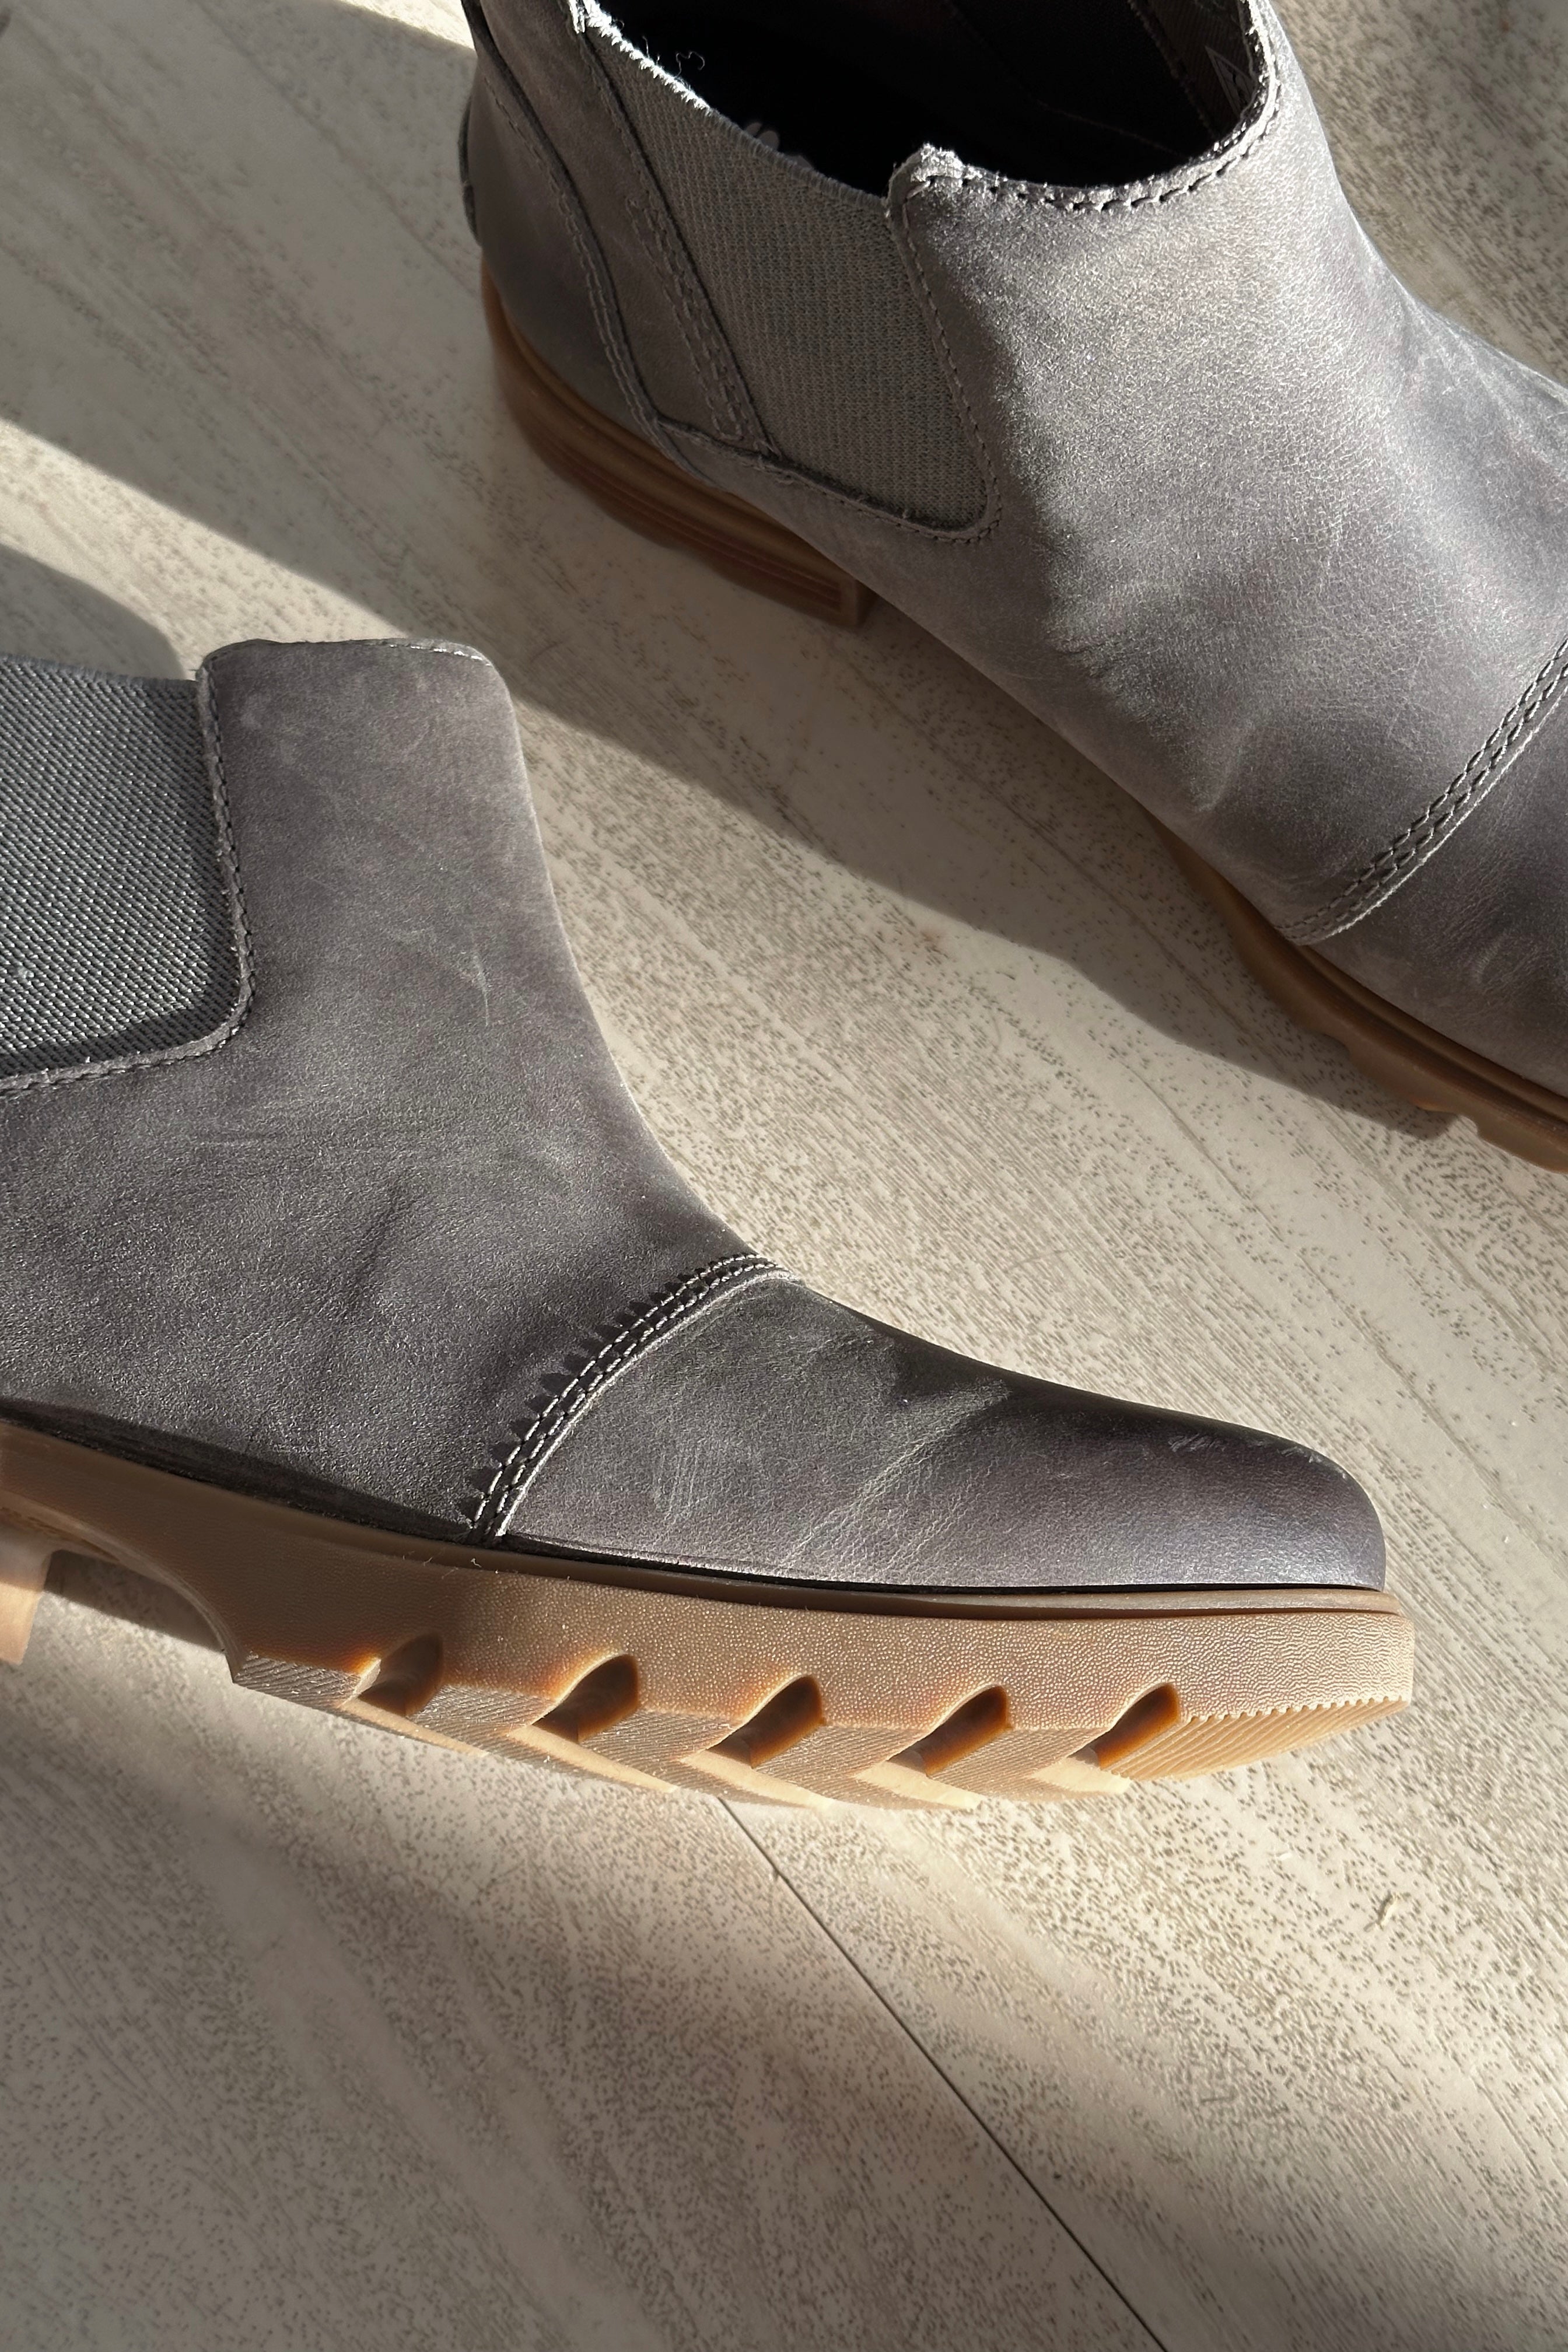 Close up view of the Emelie III Chelsea Bootie which features grey lightweight waterproof leather upper, side stretch panels, pull tabs, ridged brown sole, 1 inch heel height and 3/4 inch platform height